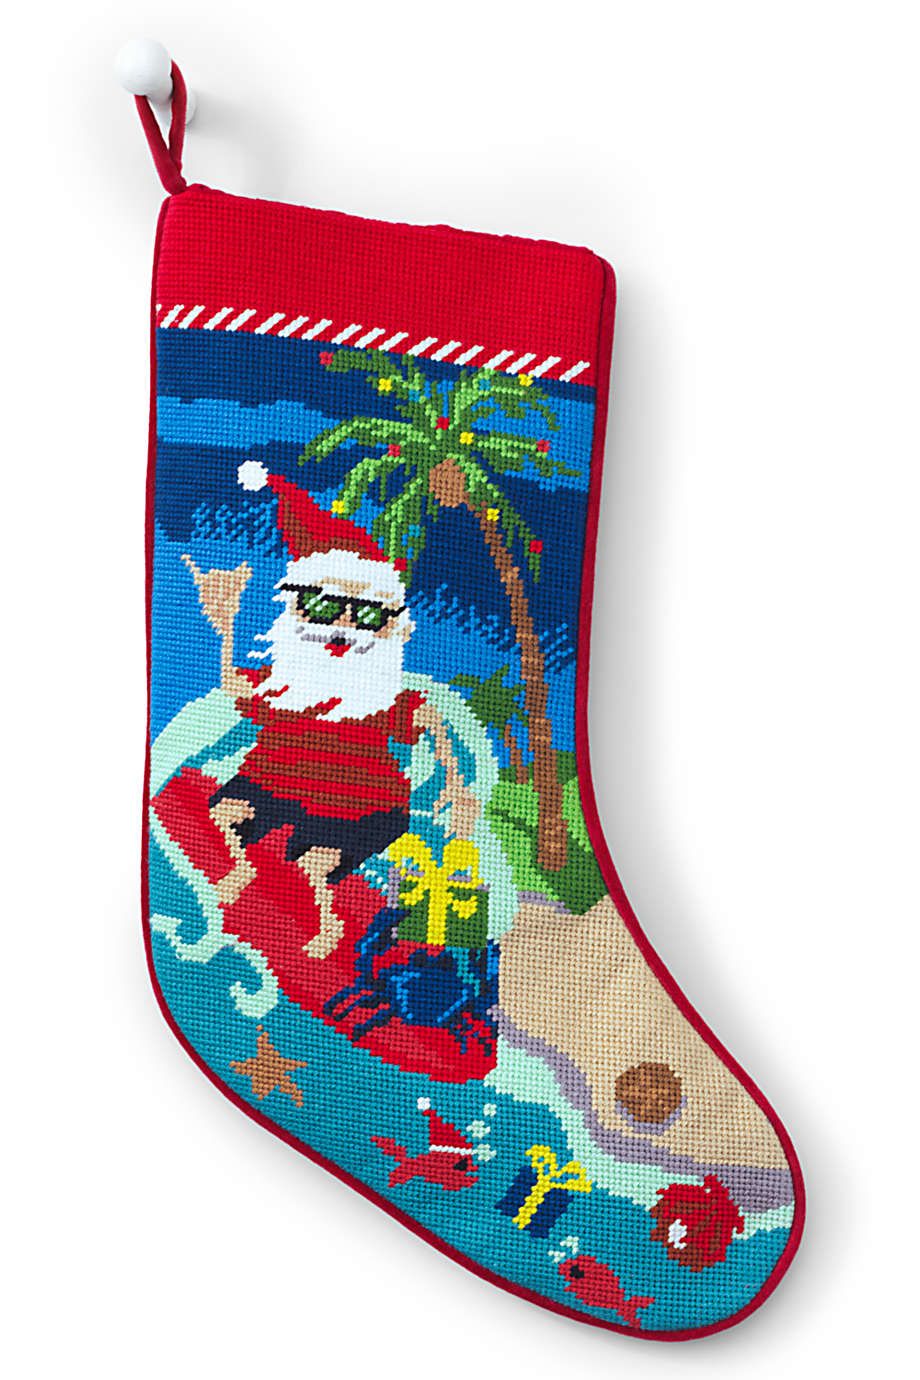 Needlepoint Personalized Christmas Stocking: Tree and Gifts